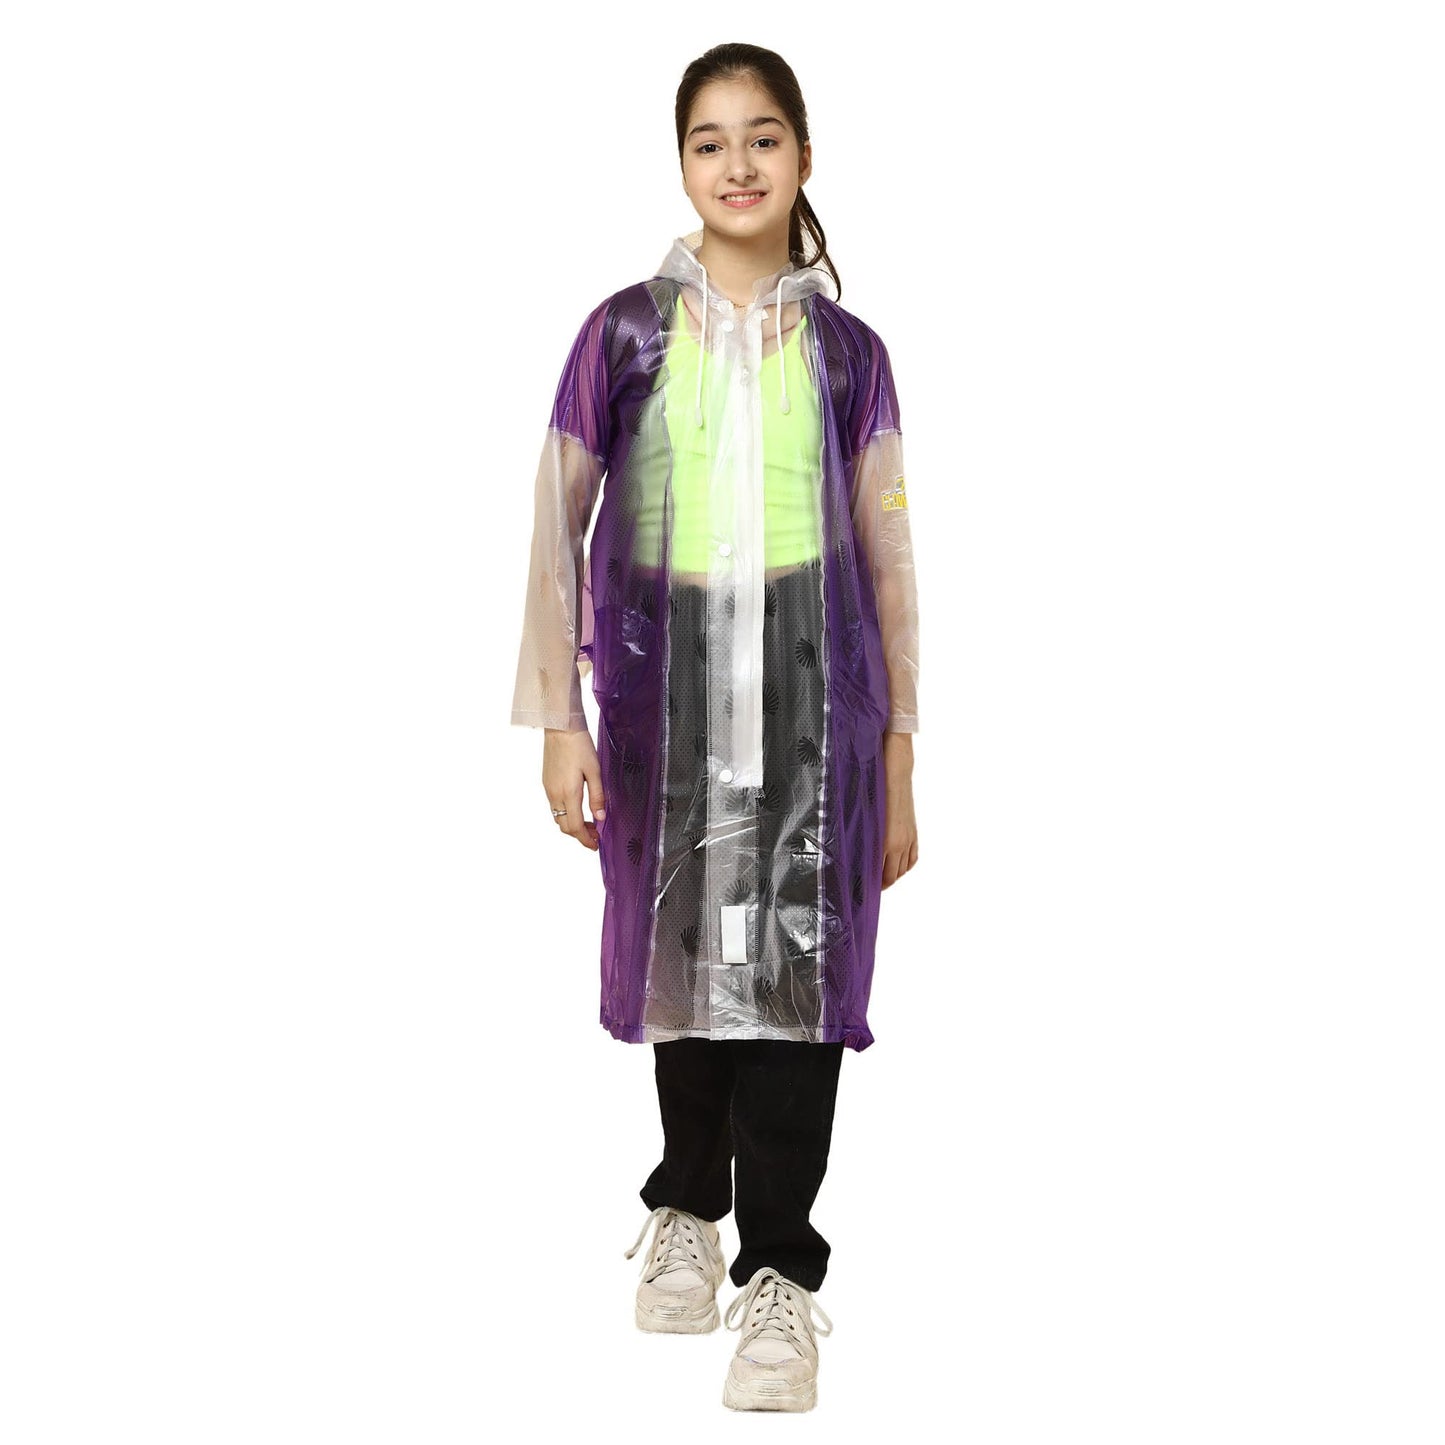 THE CLOWNFISH Archie Series Kids Waterproof PVC Longcoat with Adjustable Hood & Extra Space for Backpack/Schoolbag Holding. Plastic Pouch. Kid Age-8-9 years (Size-33-Purple)